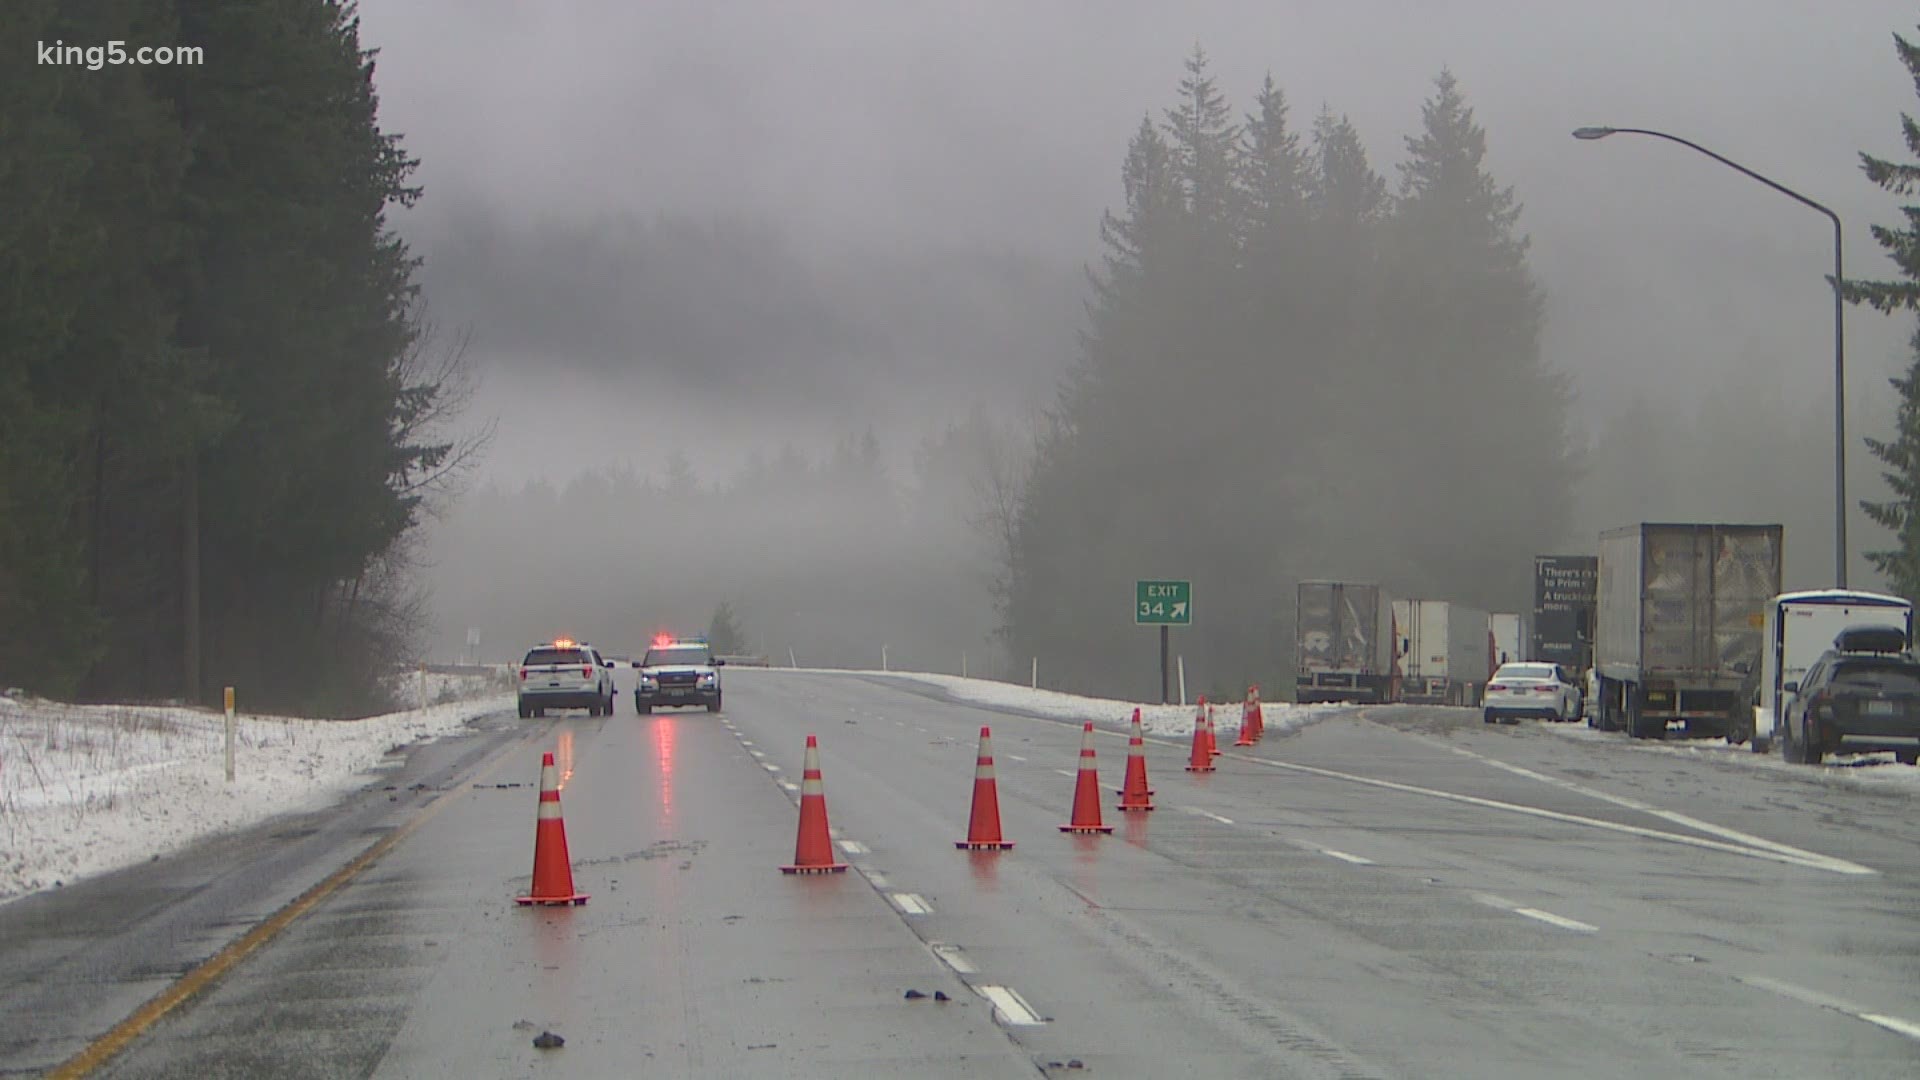 Snoqualmie Pass was closed for 23 hours due to high avalanche danger. Stevens Pass remains closed.